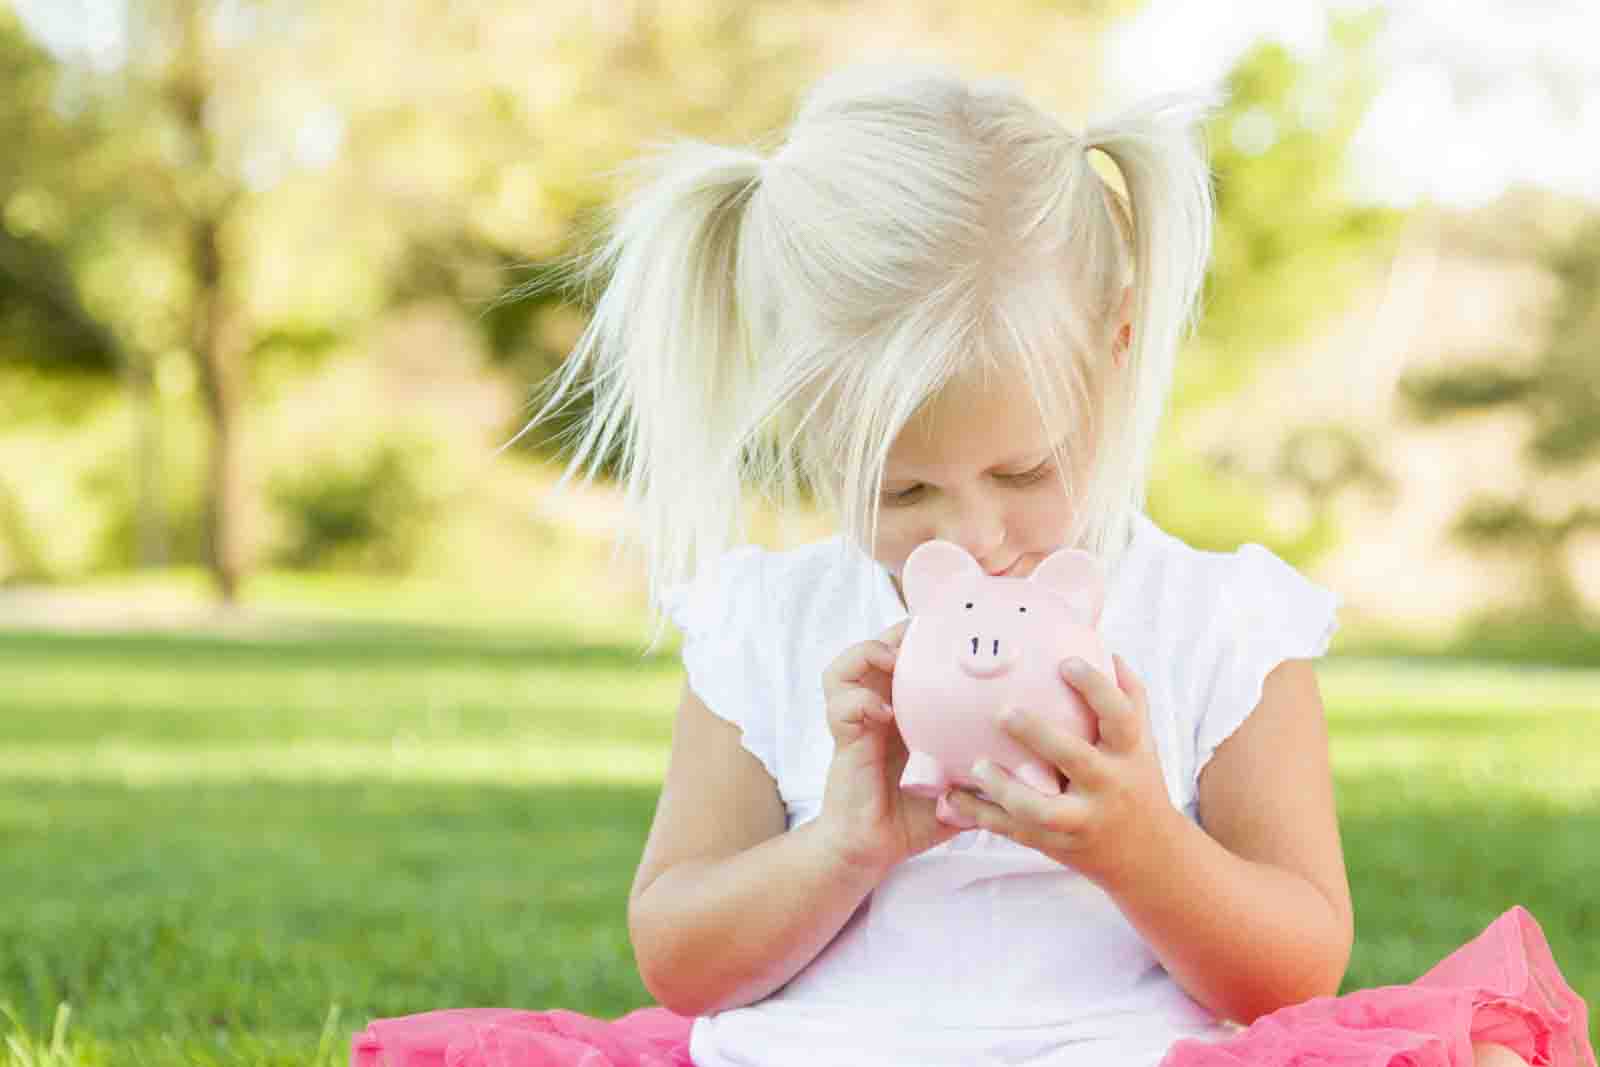 How Kids Can Make Money Great Ways Your Kid Can Earn Money at Any Age